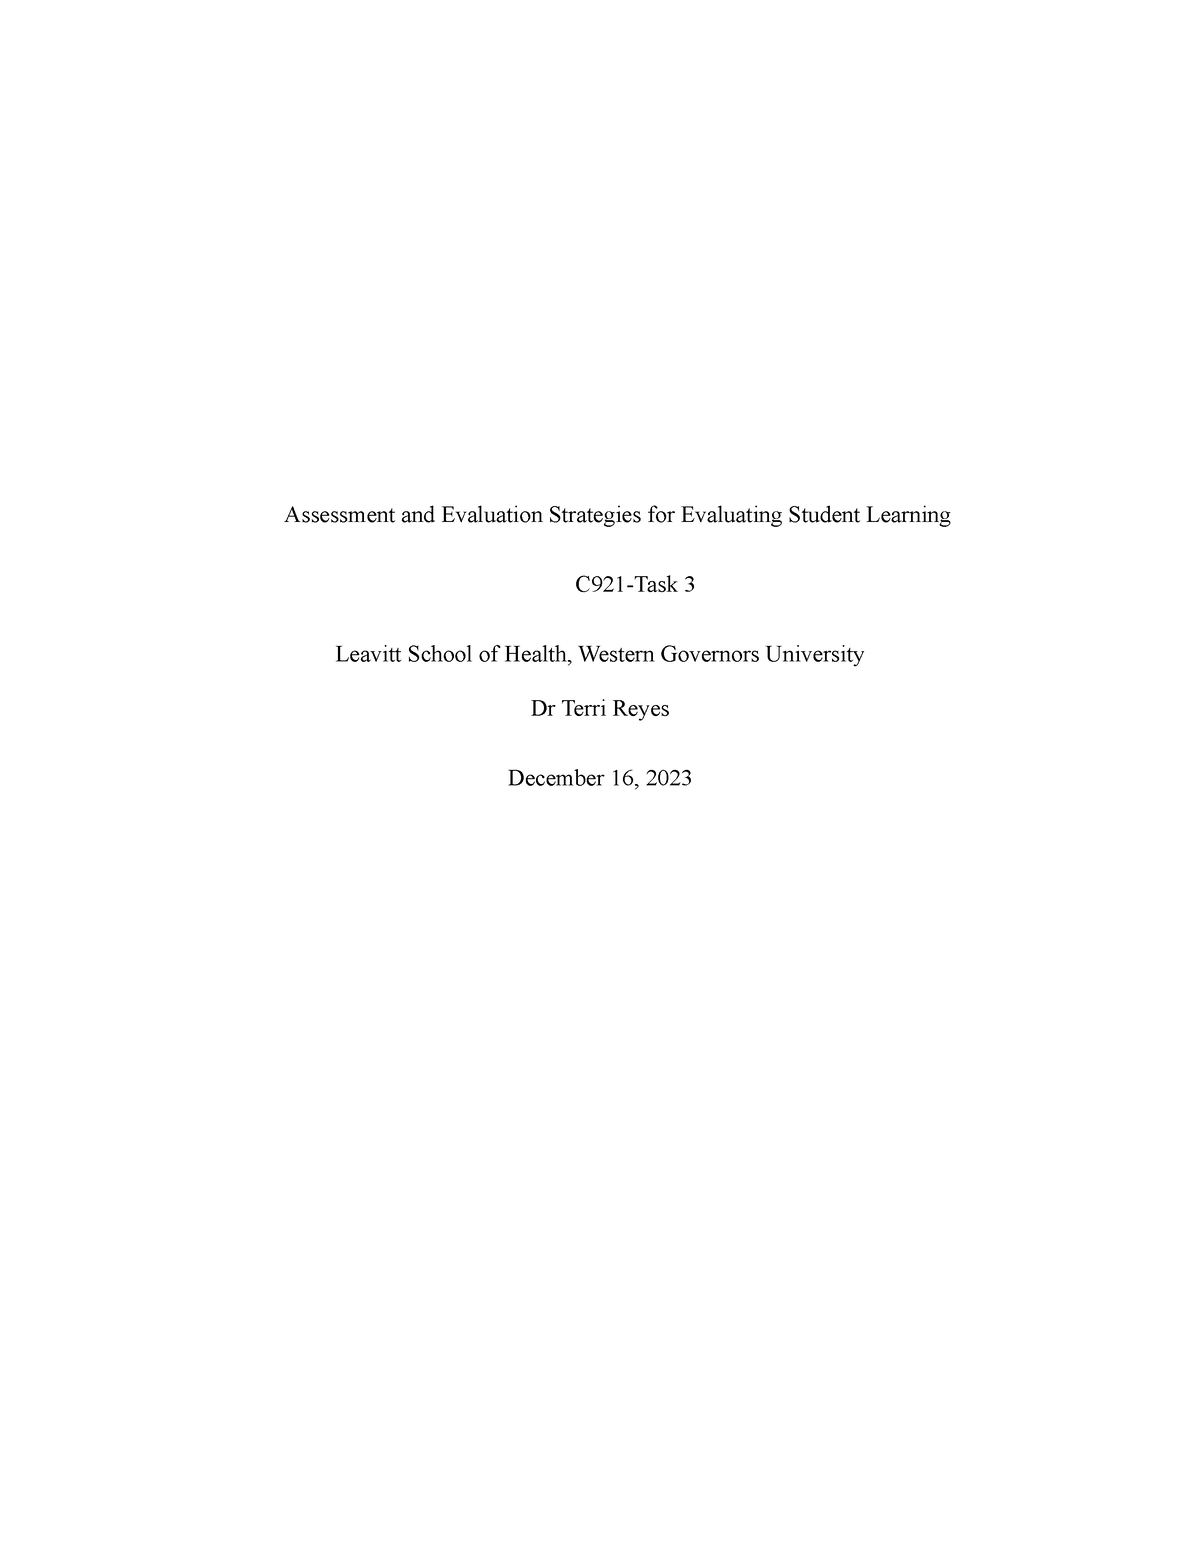 C921-Task 3 paper 3rd submission - Assessment and Evaluation Strategies ...